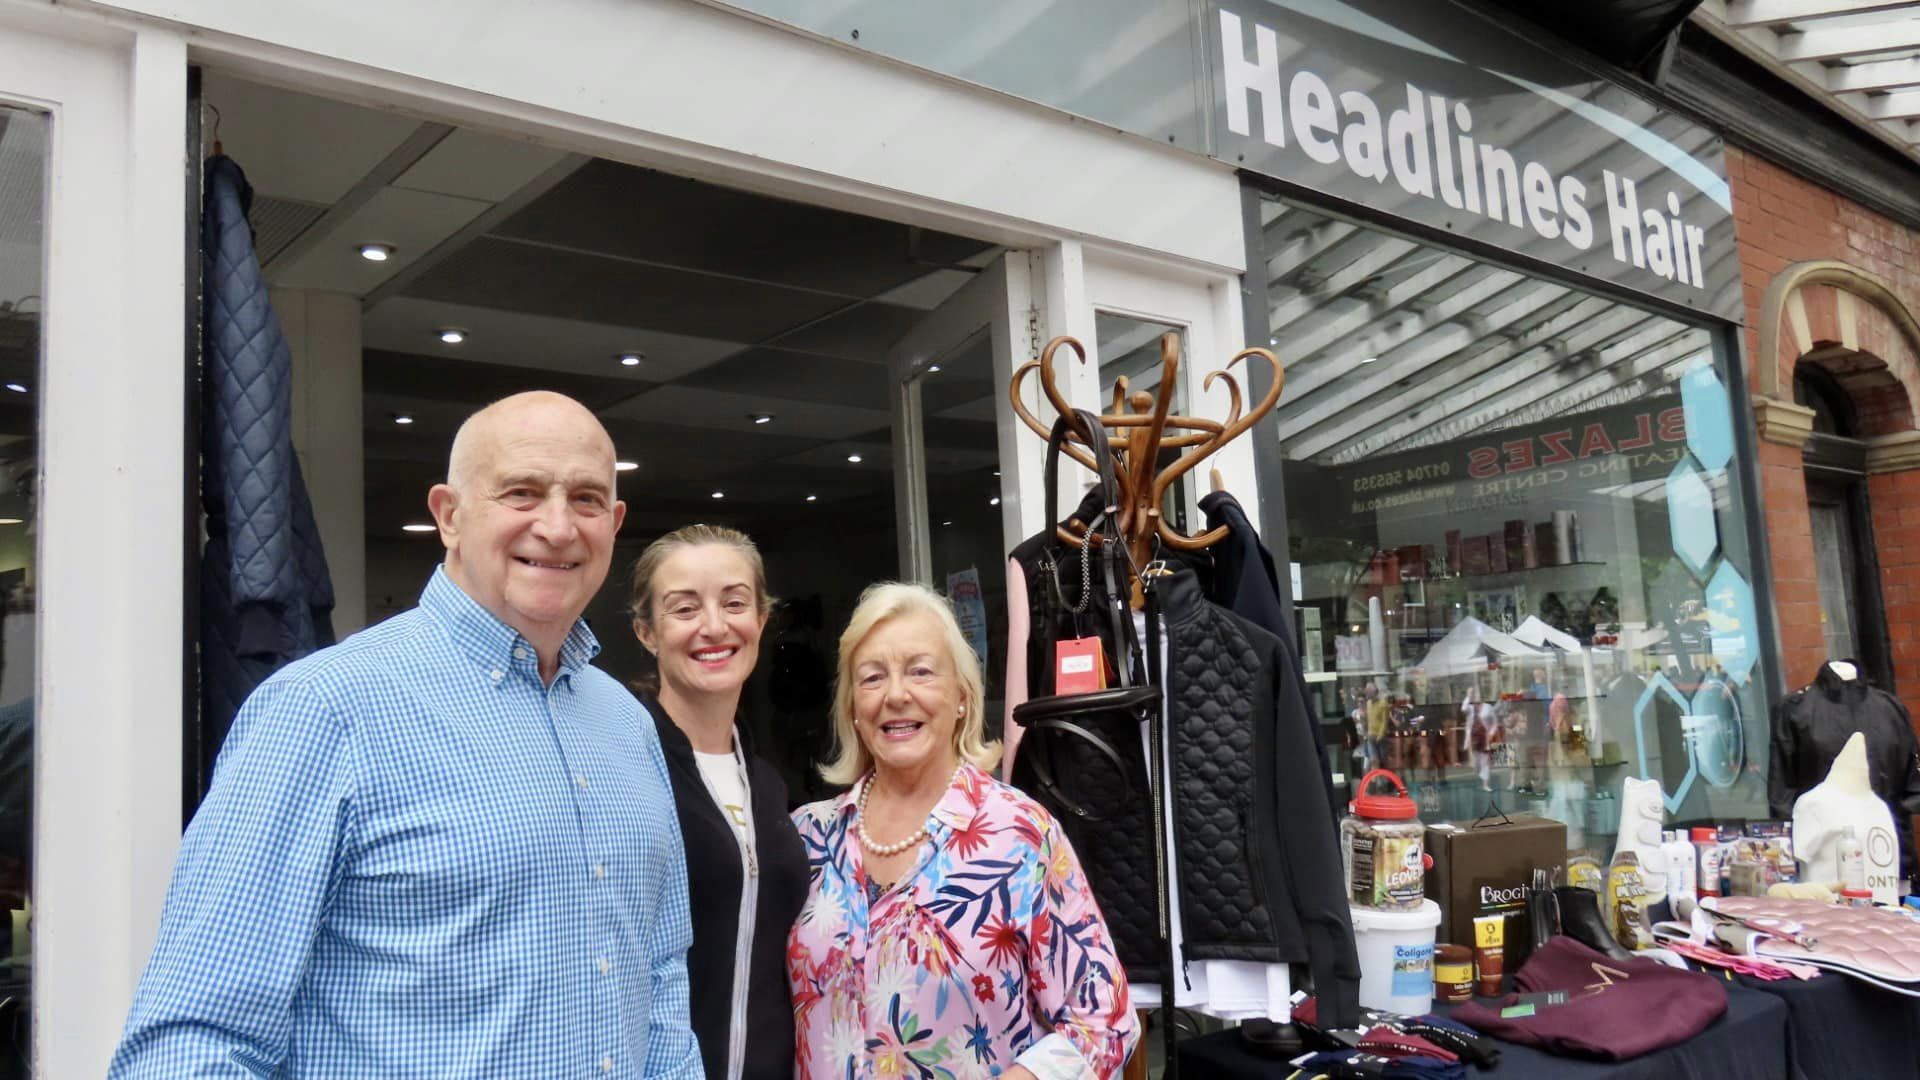 Tony, Tina and Lesley Marriott at Headlines Hair at Birkdale Village Summer Fayre. Photo by Andrew Brown Stand Up For Southport